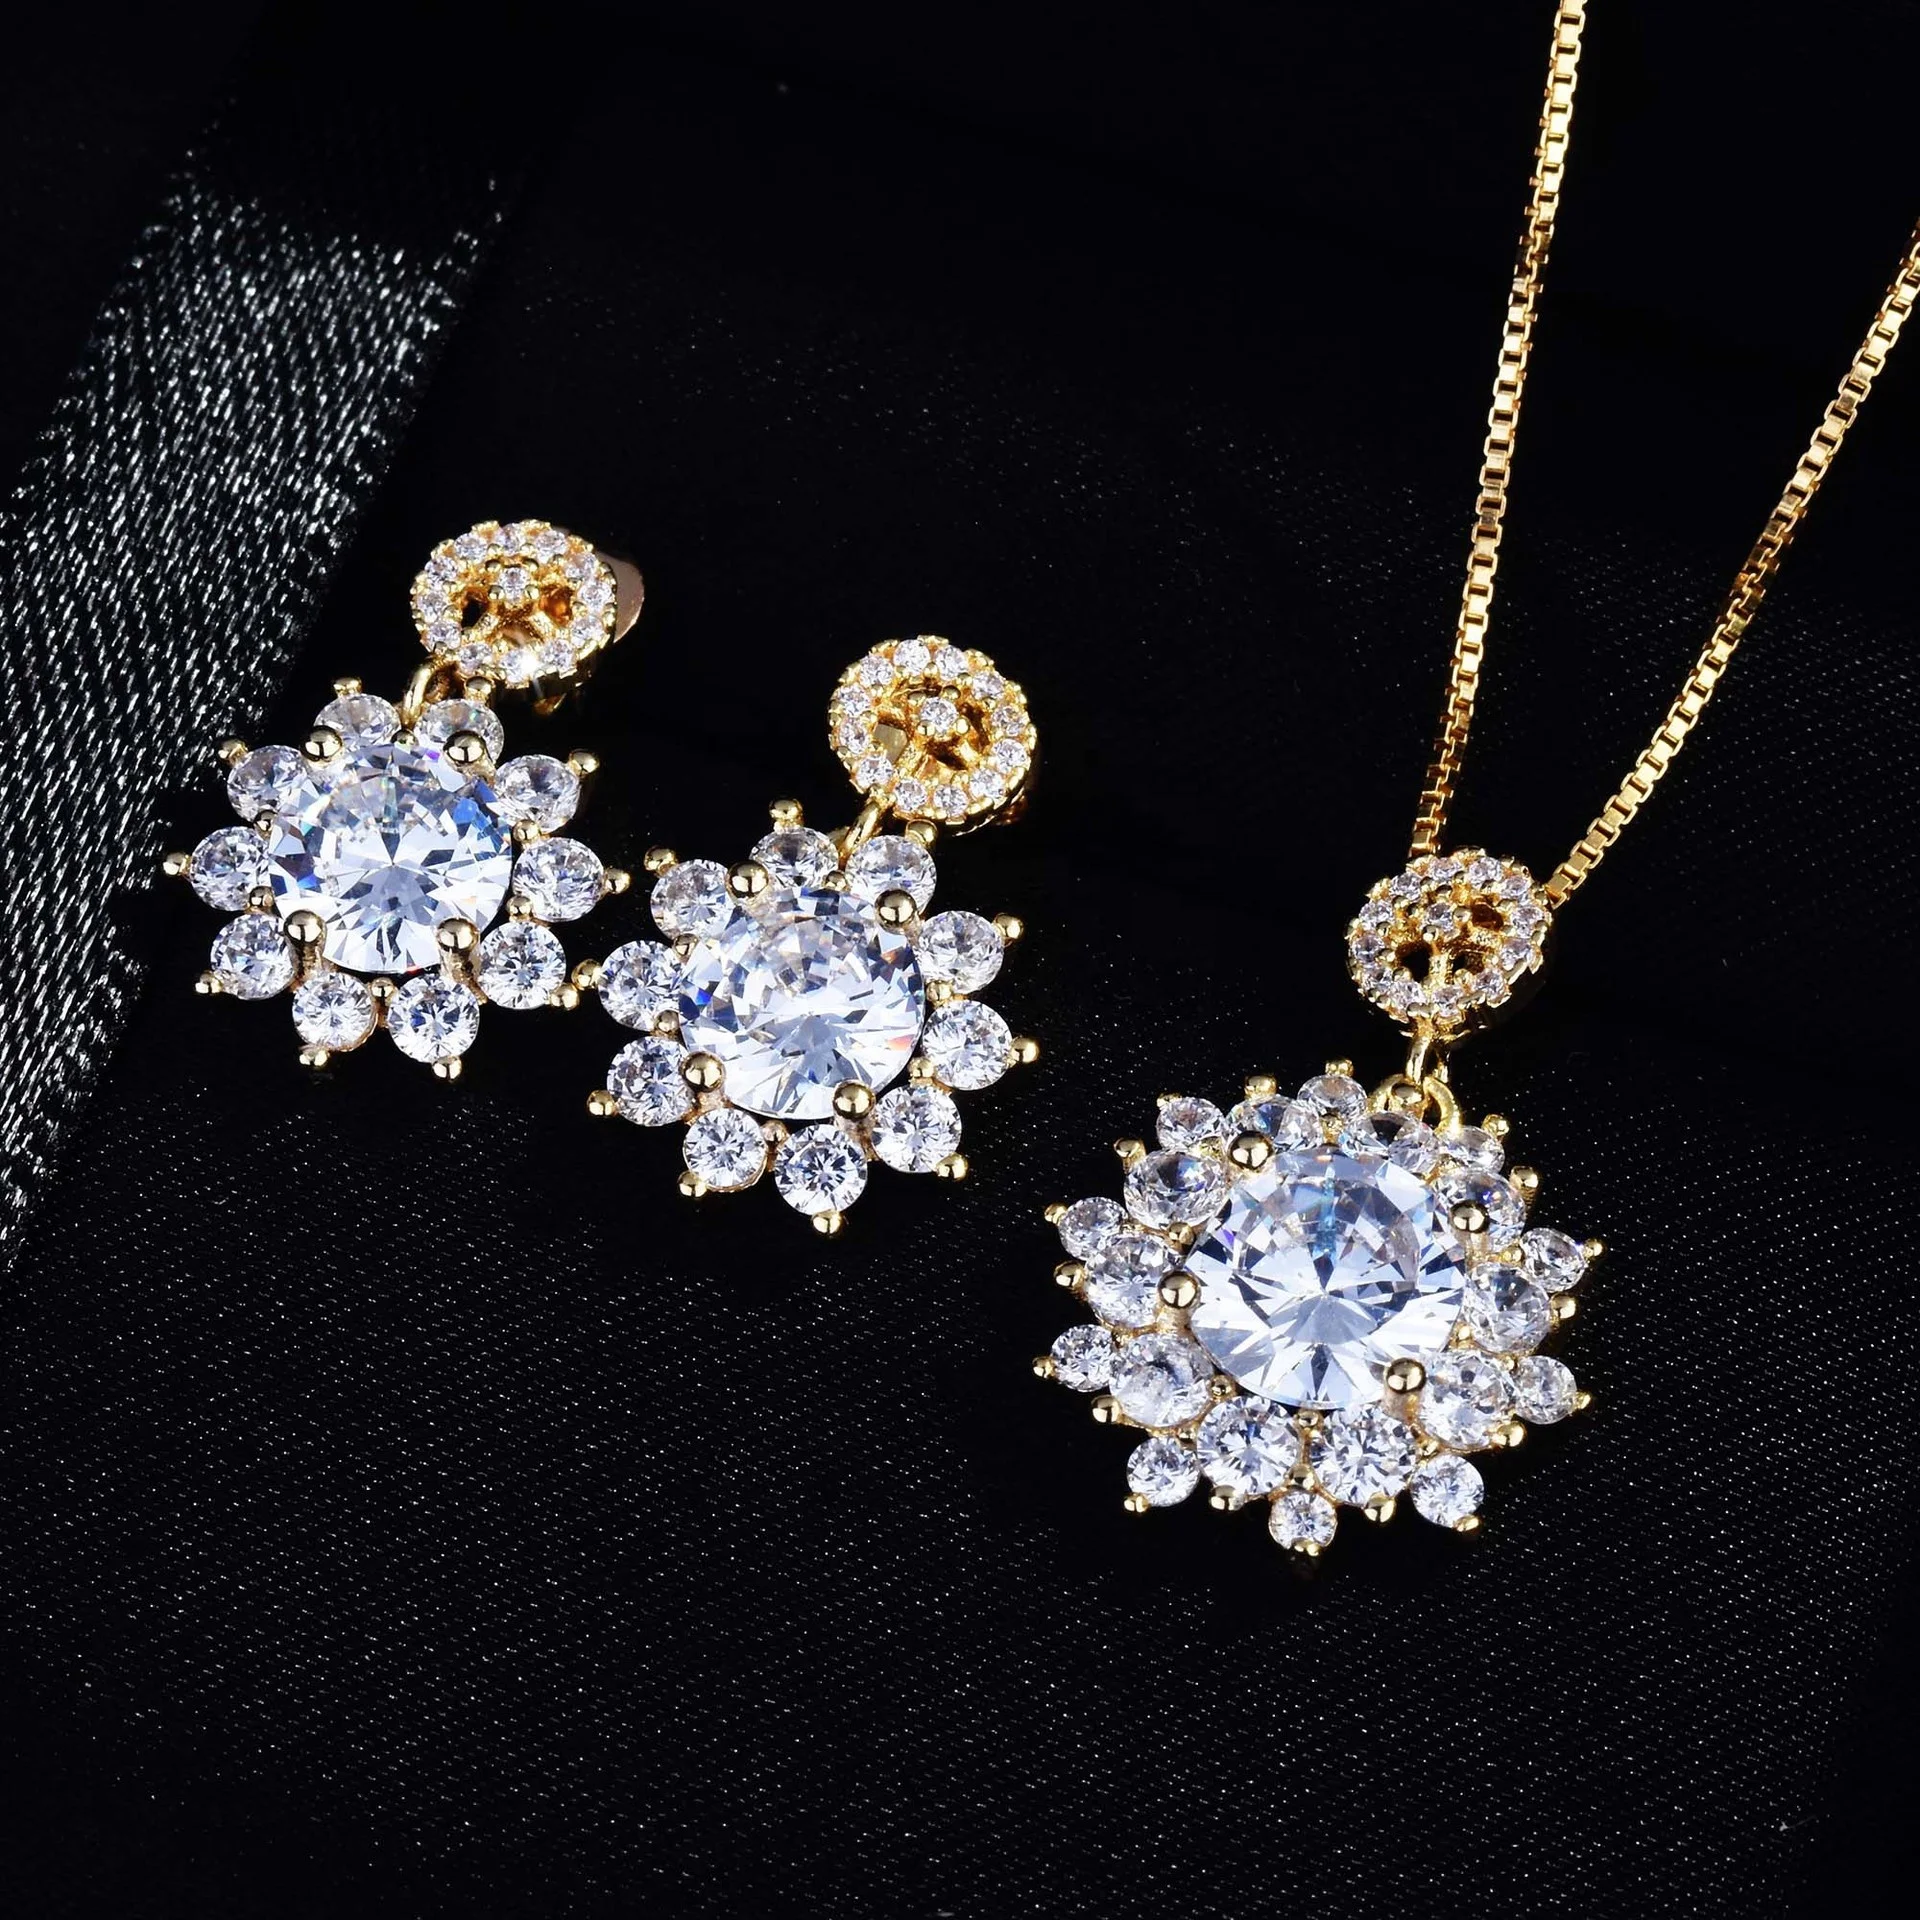 

Fashion Wedding Bridal Zircon Jewelry Sets For Women Romantic Sunflowers Snowflakes Choker Elegant Necklace Earrings Fine Gift, Picture shows